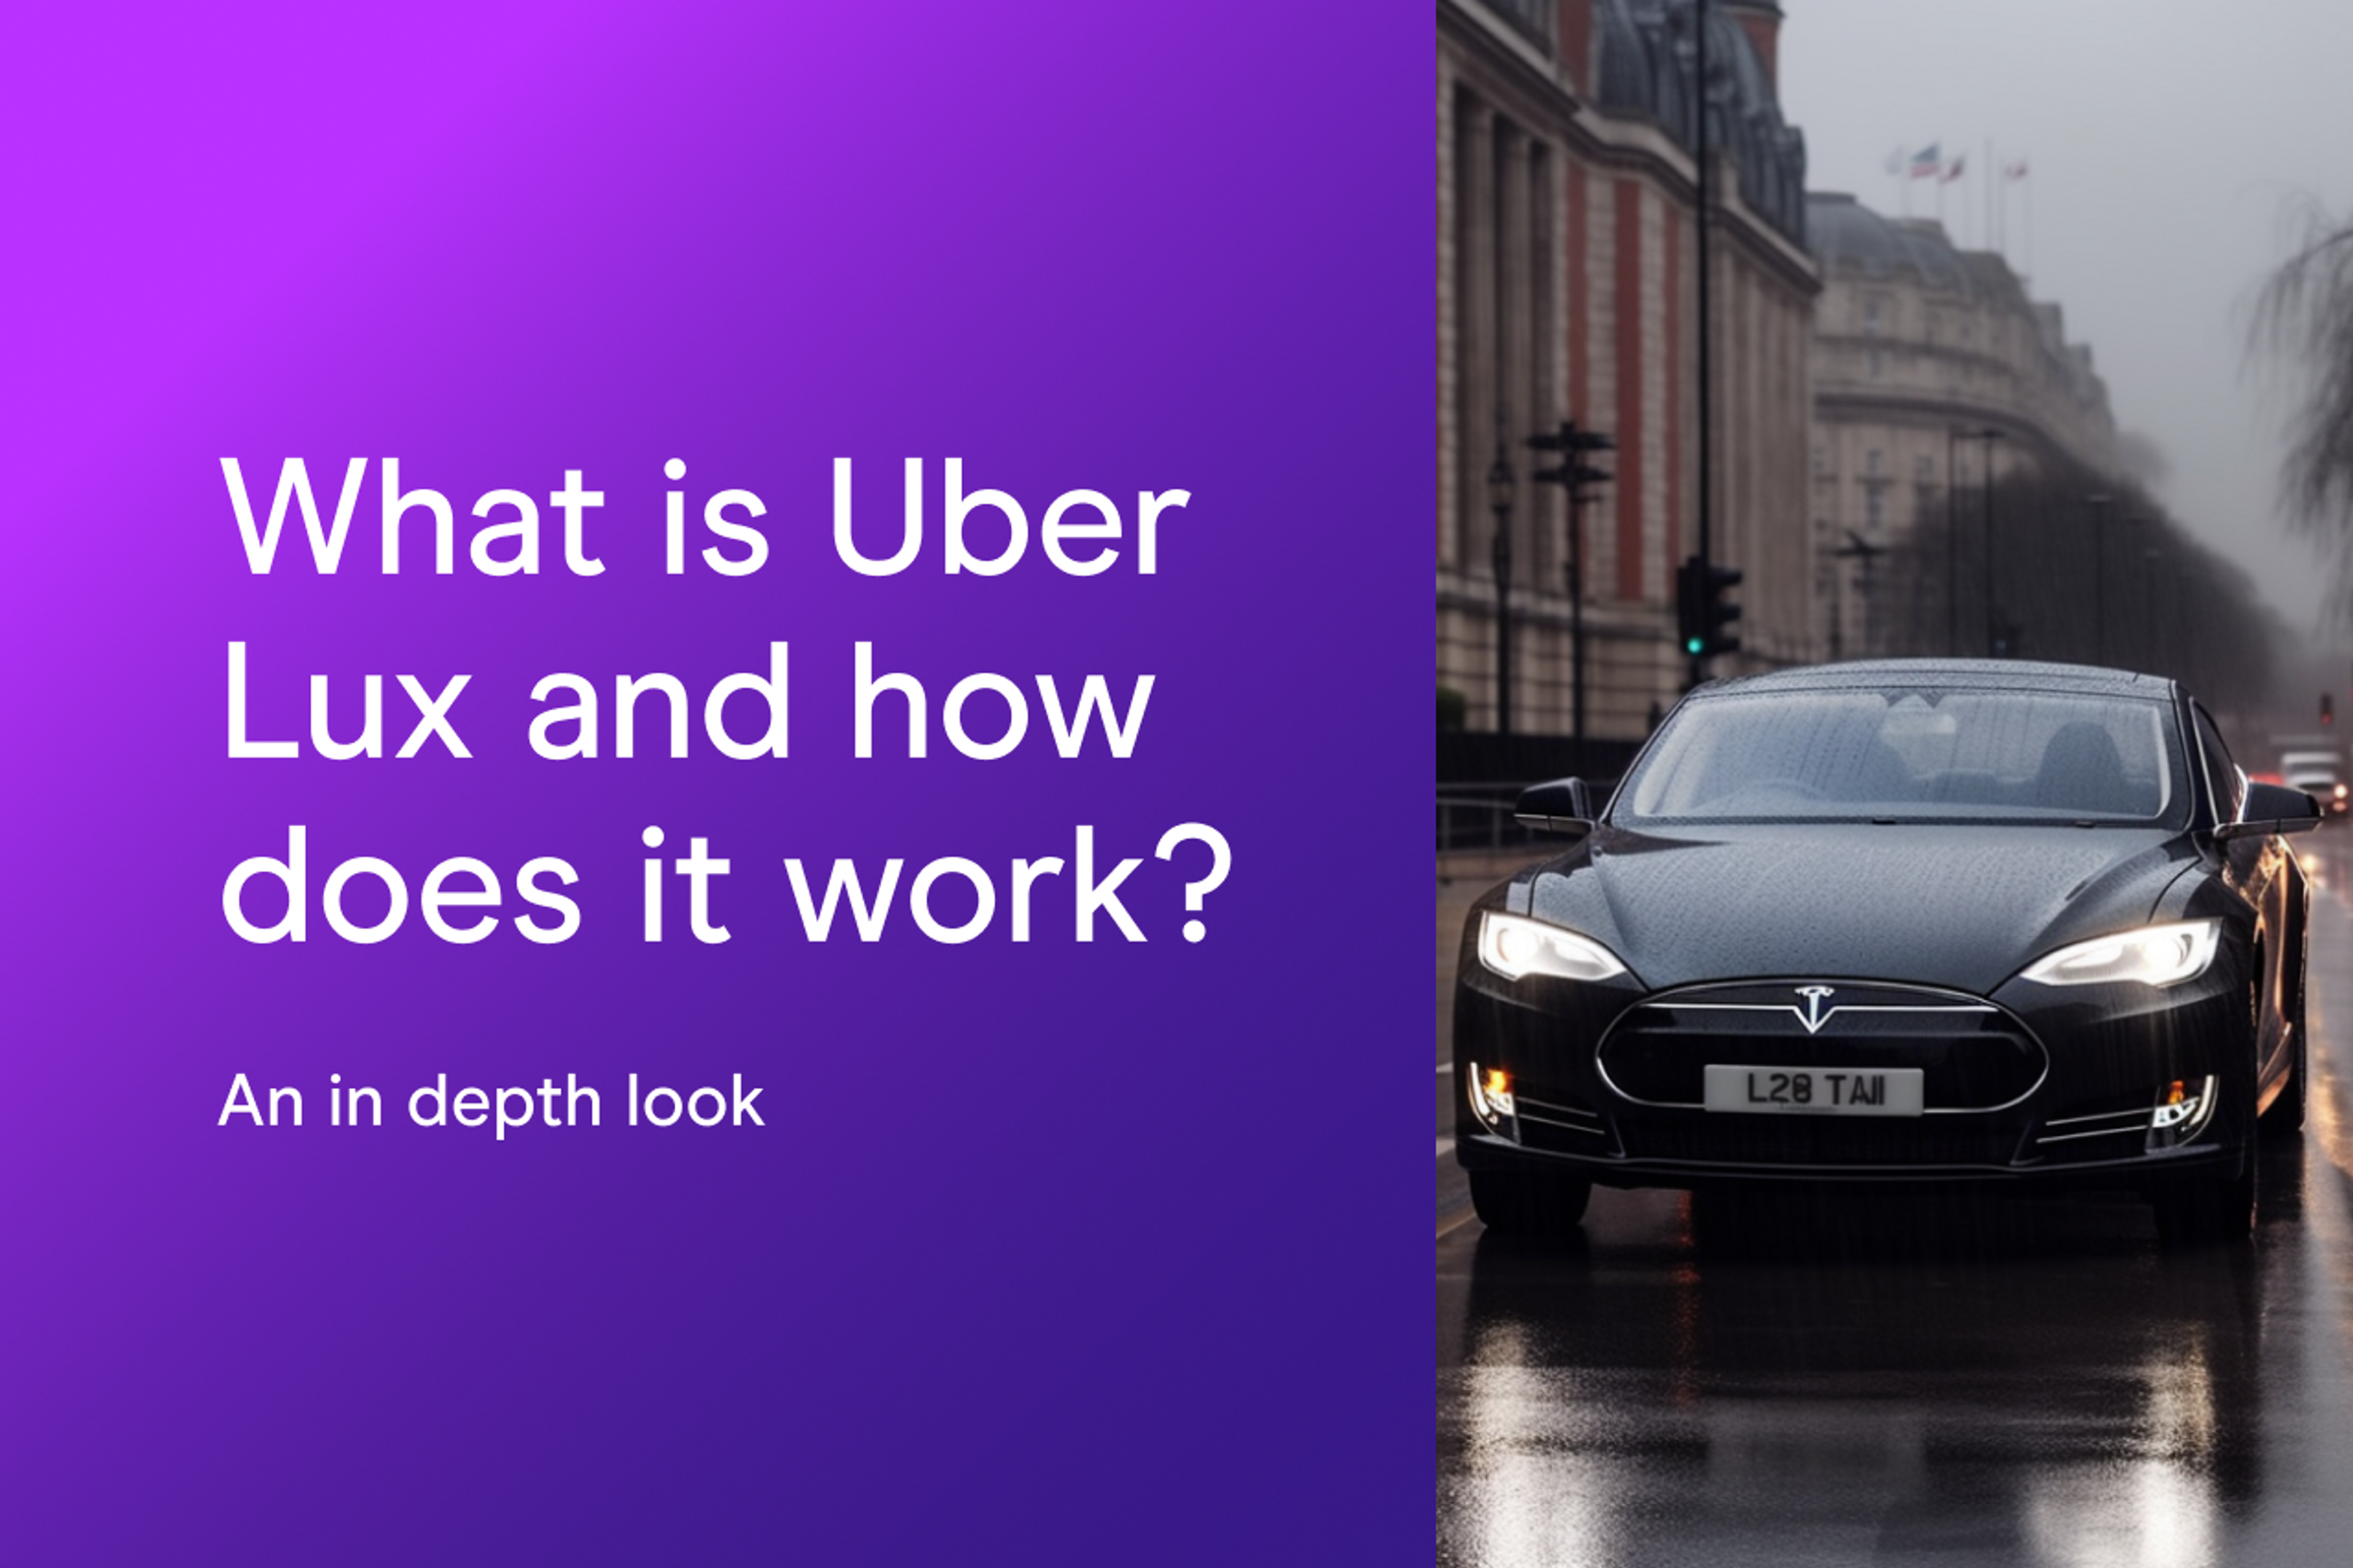 What is Uber Lux and how does it work? An in-depth look